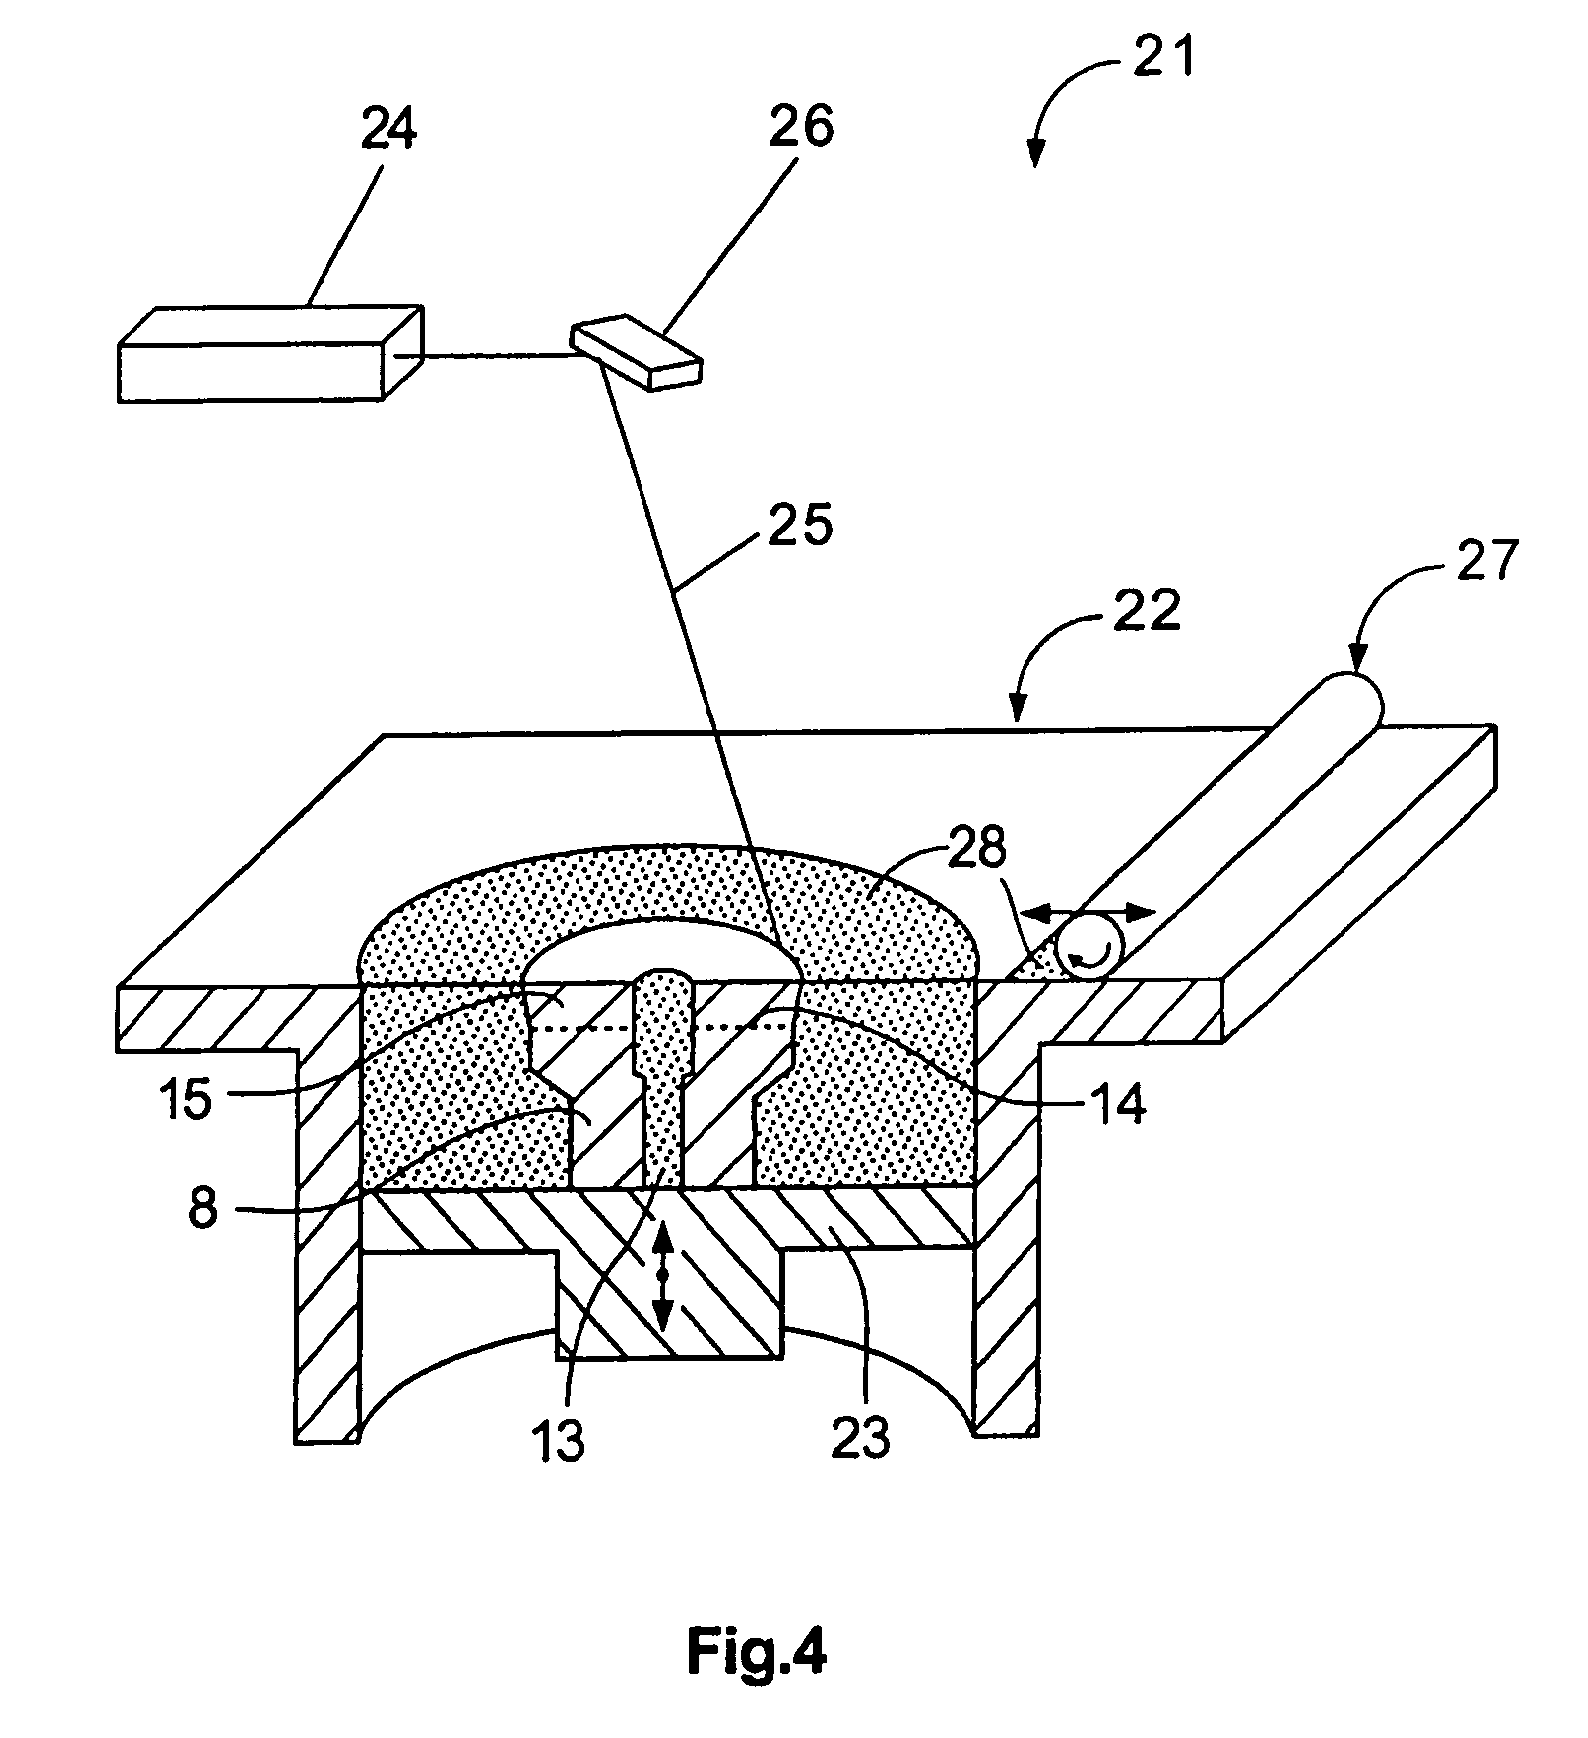 Method for manufacturing implant abutments for dental implants, and an implant abutment for a dental implant